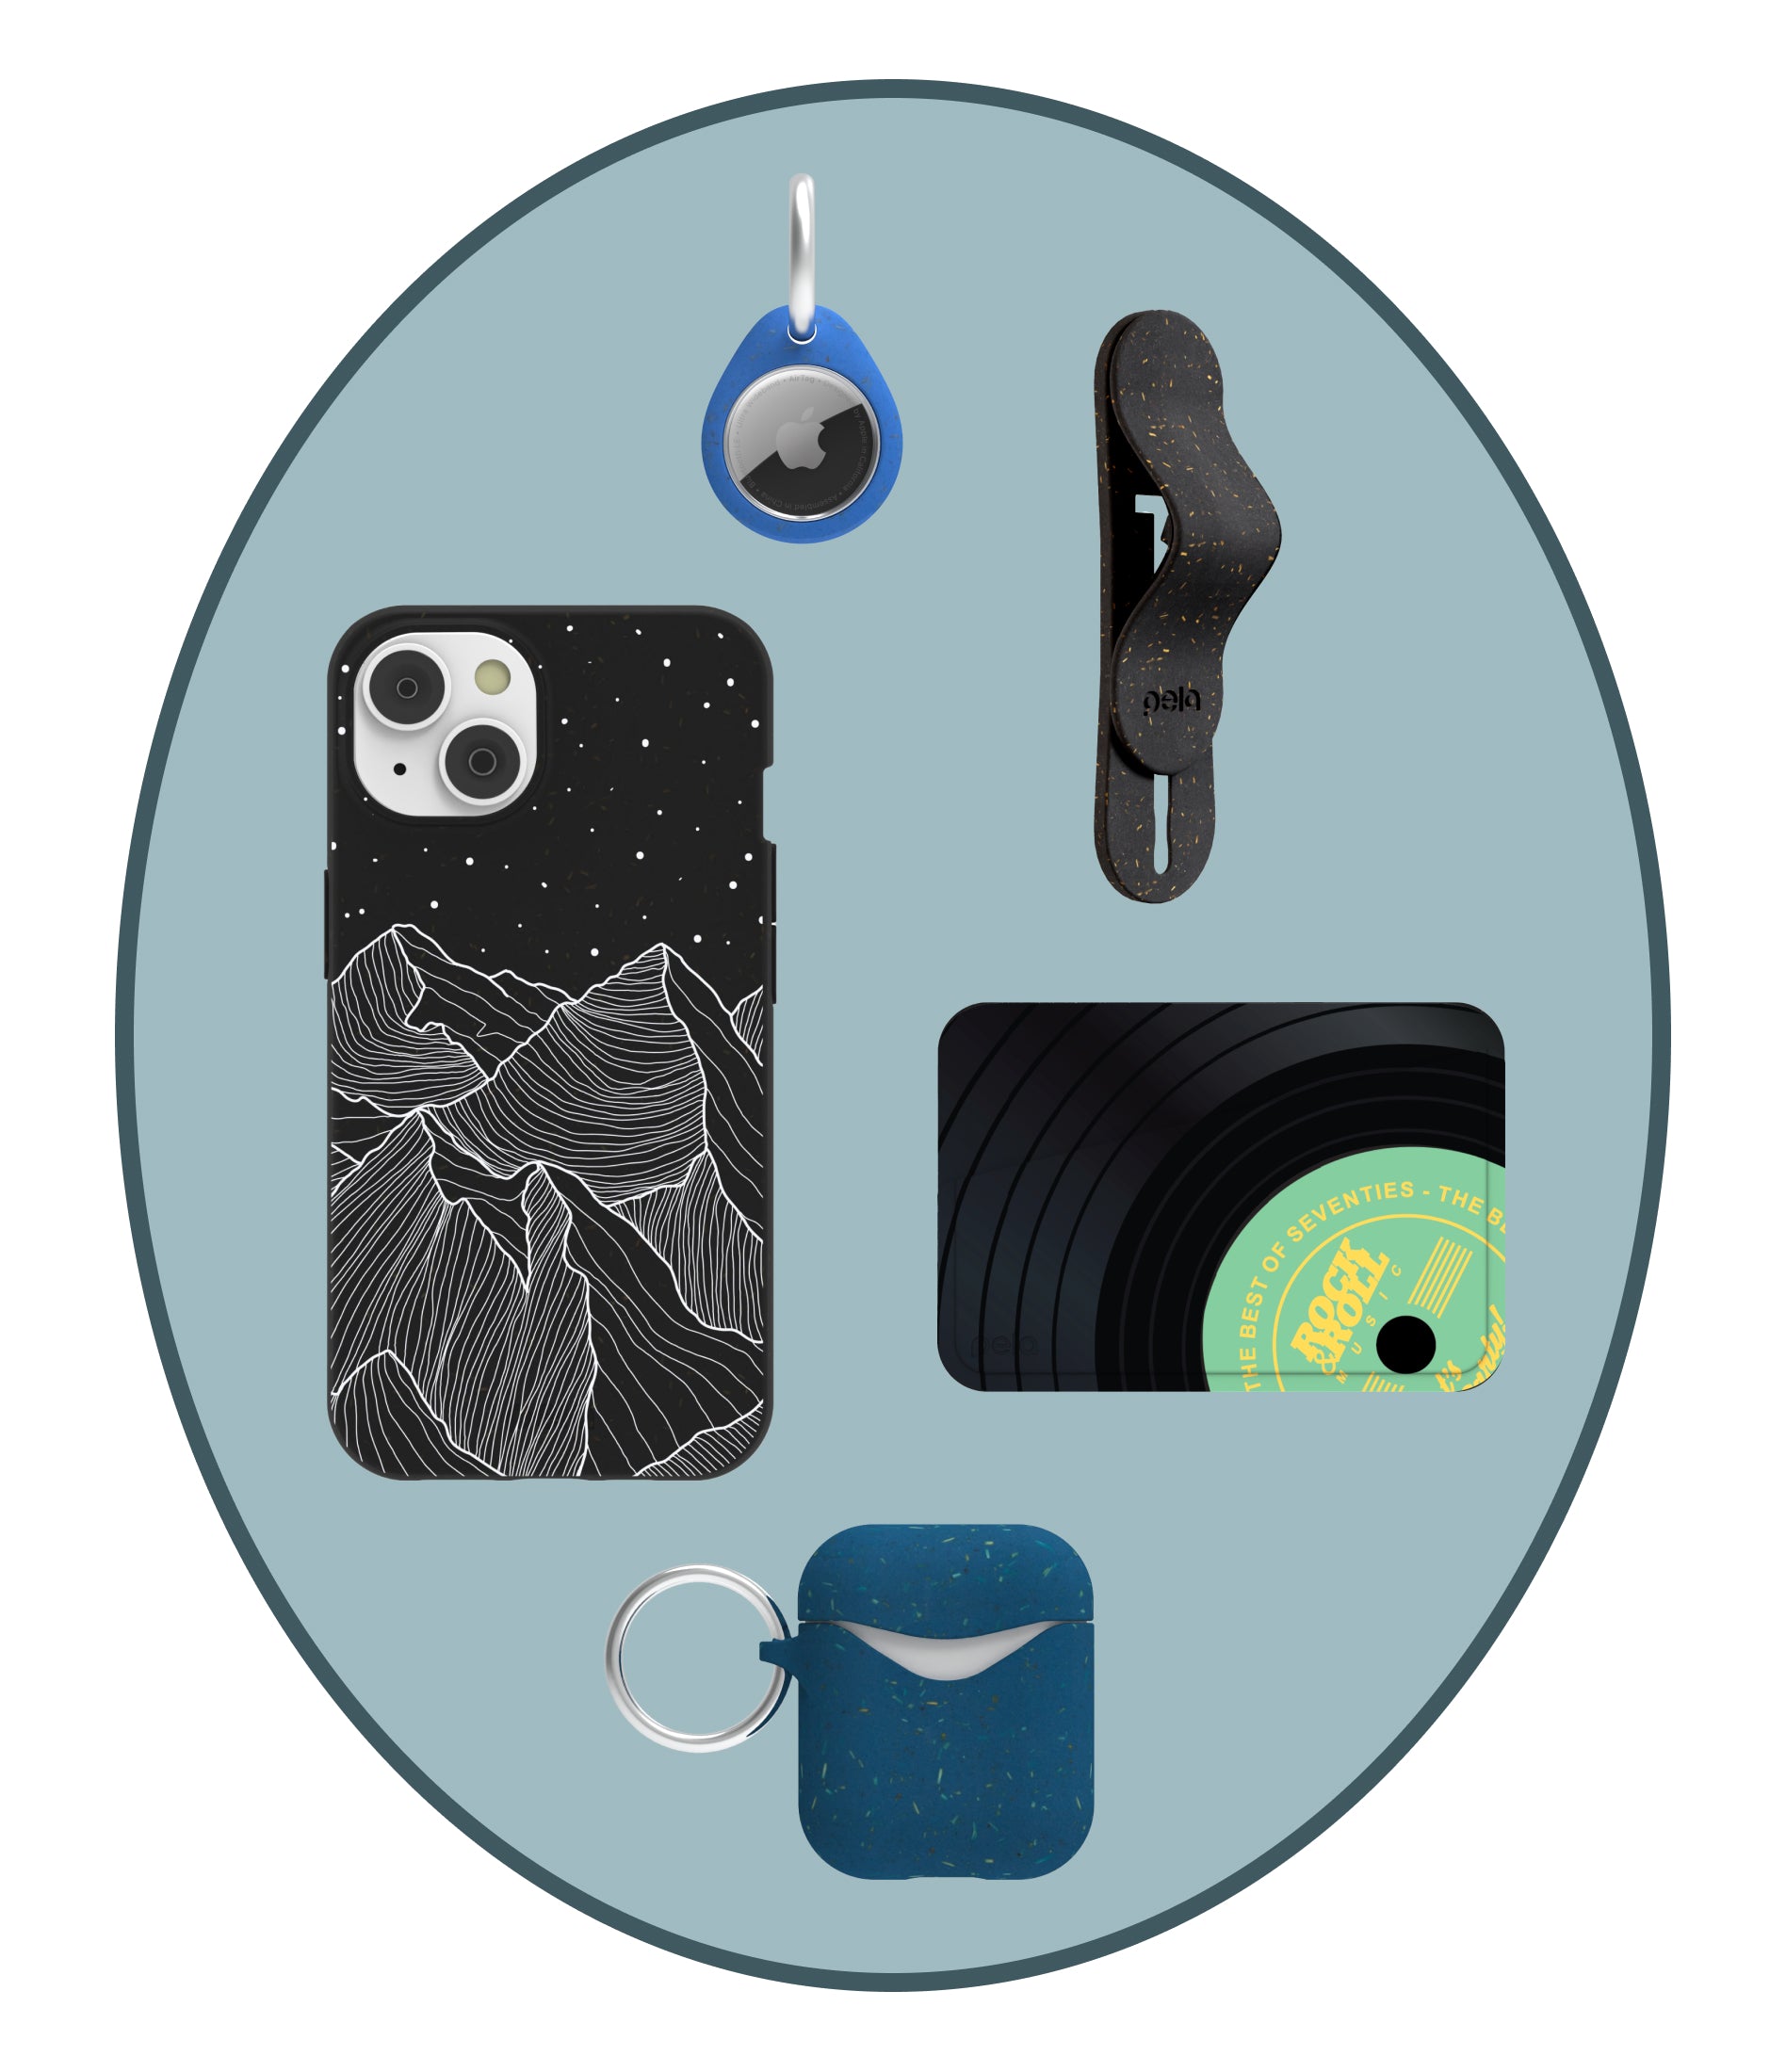 Alt-text: Various black accessories with mountain design displayed, including a phone case, AirTag, wallet, earphones case, and a clip.